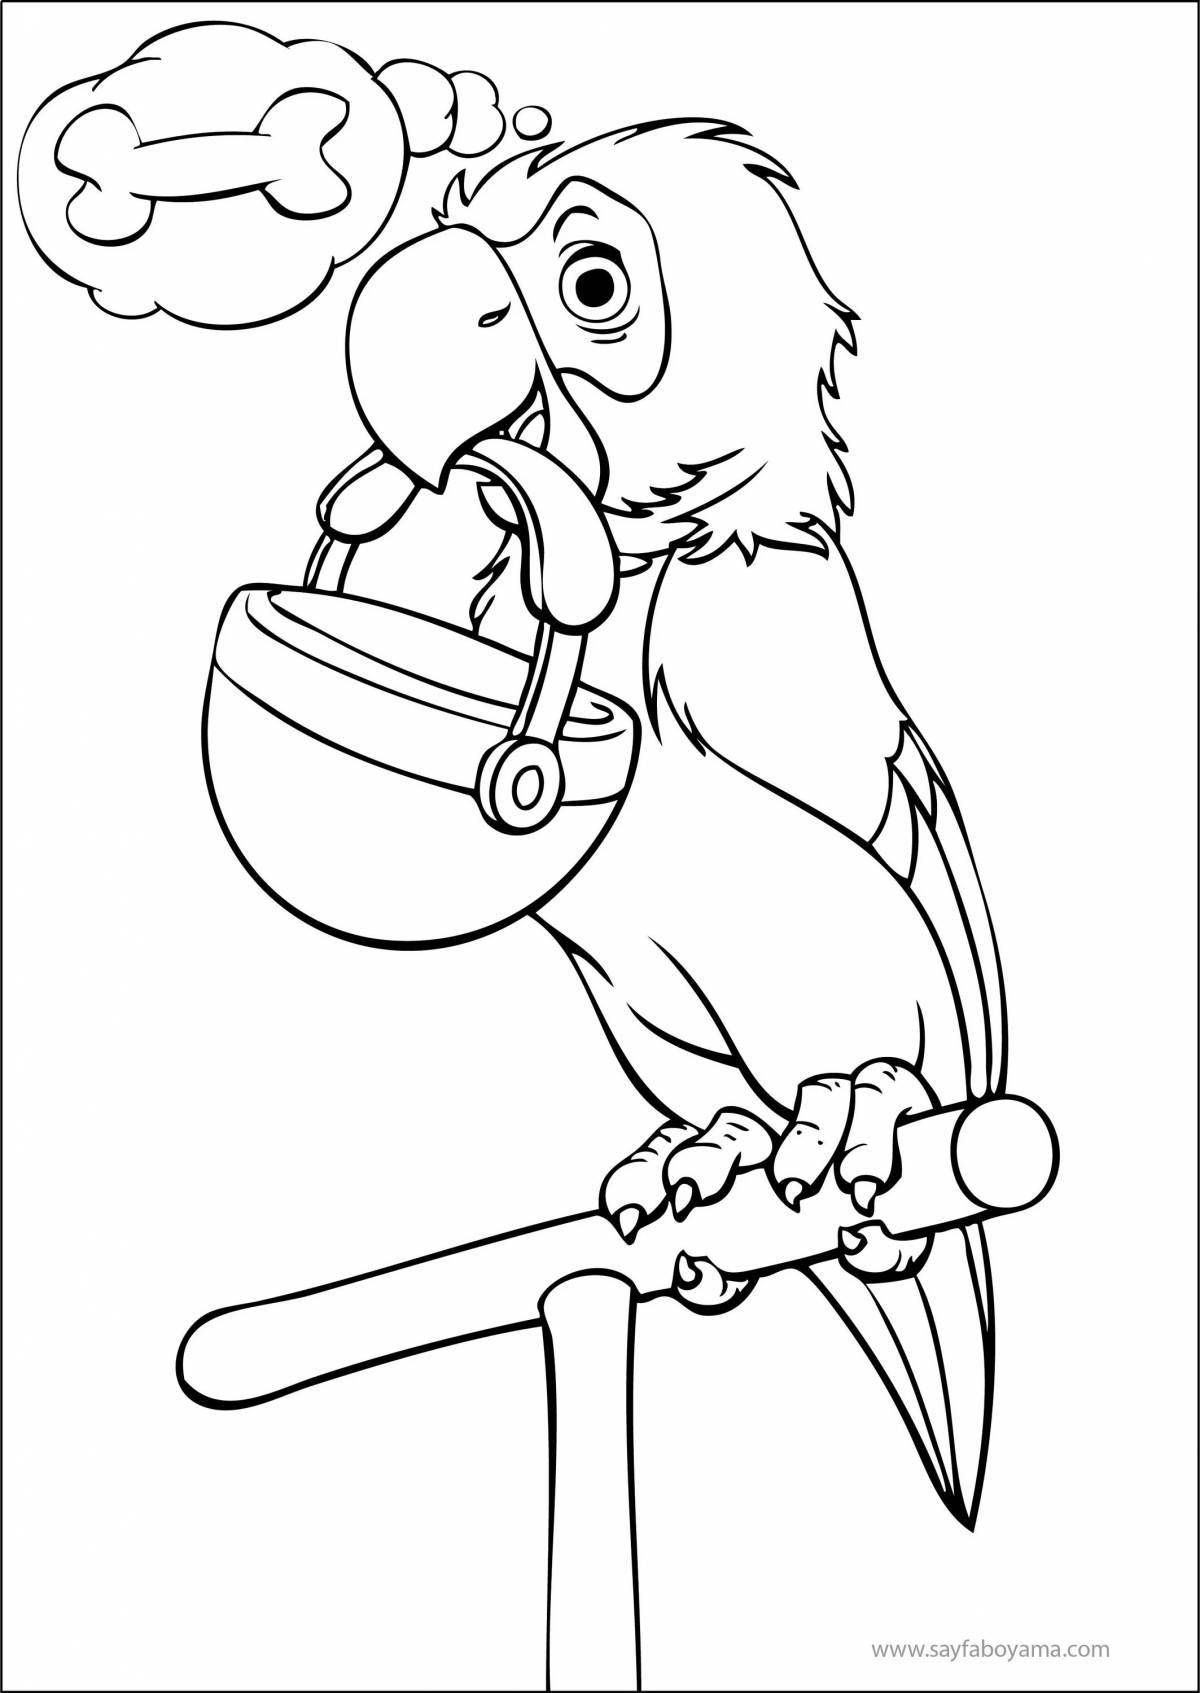 Great parrot coloring book for 6-7 year olds